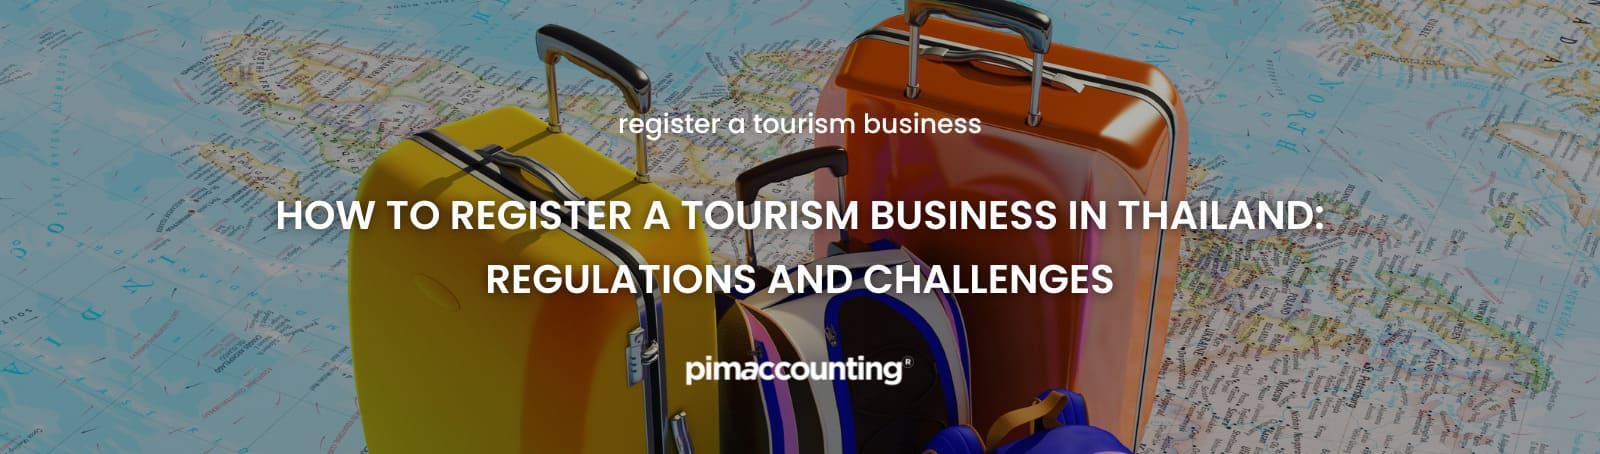 How to register a tourism business in Thailand: Regulations and challenges - Pimaccounting